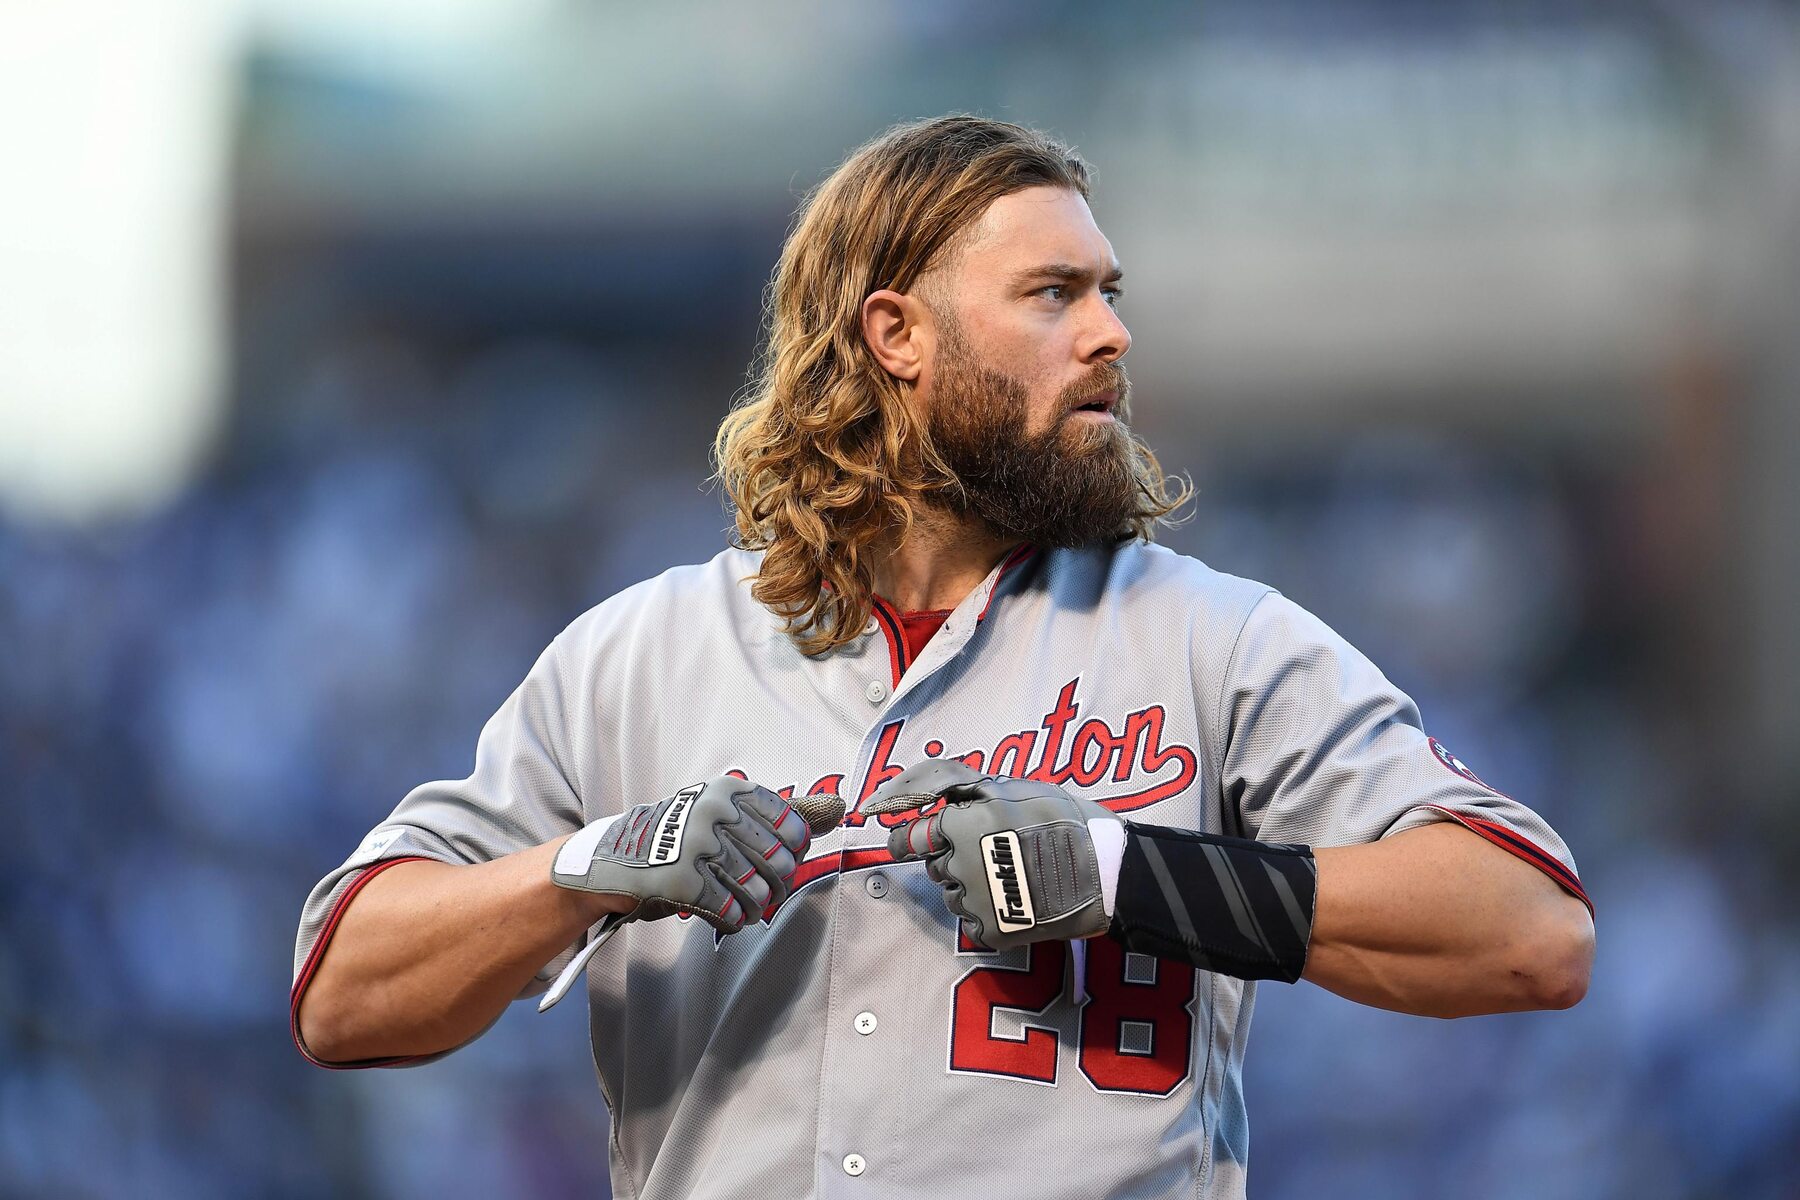 11-astounding-facts-about-jayson-werth